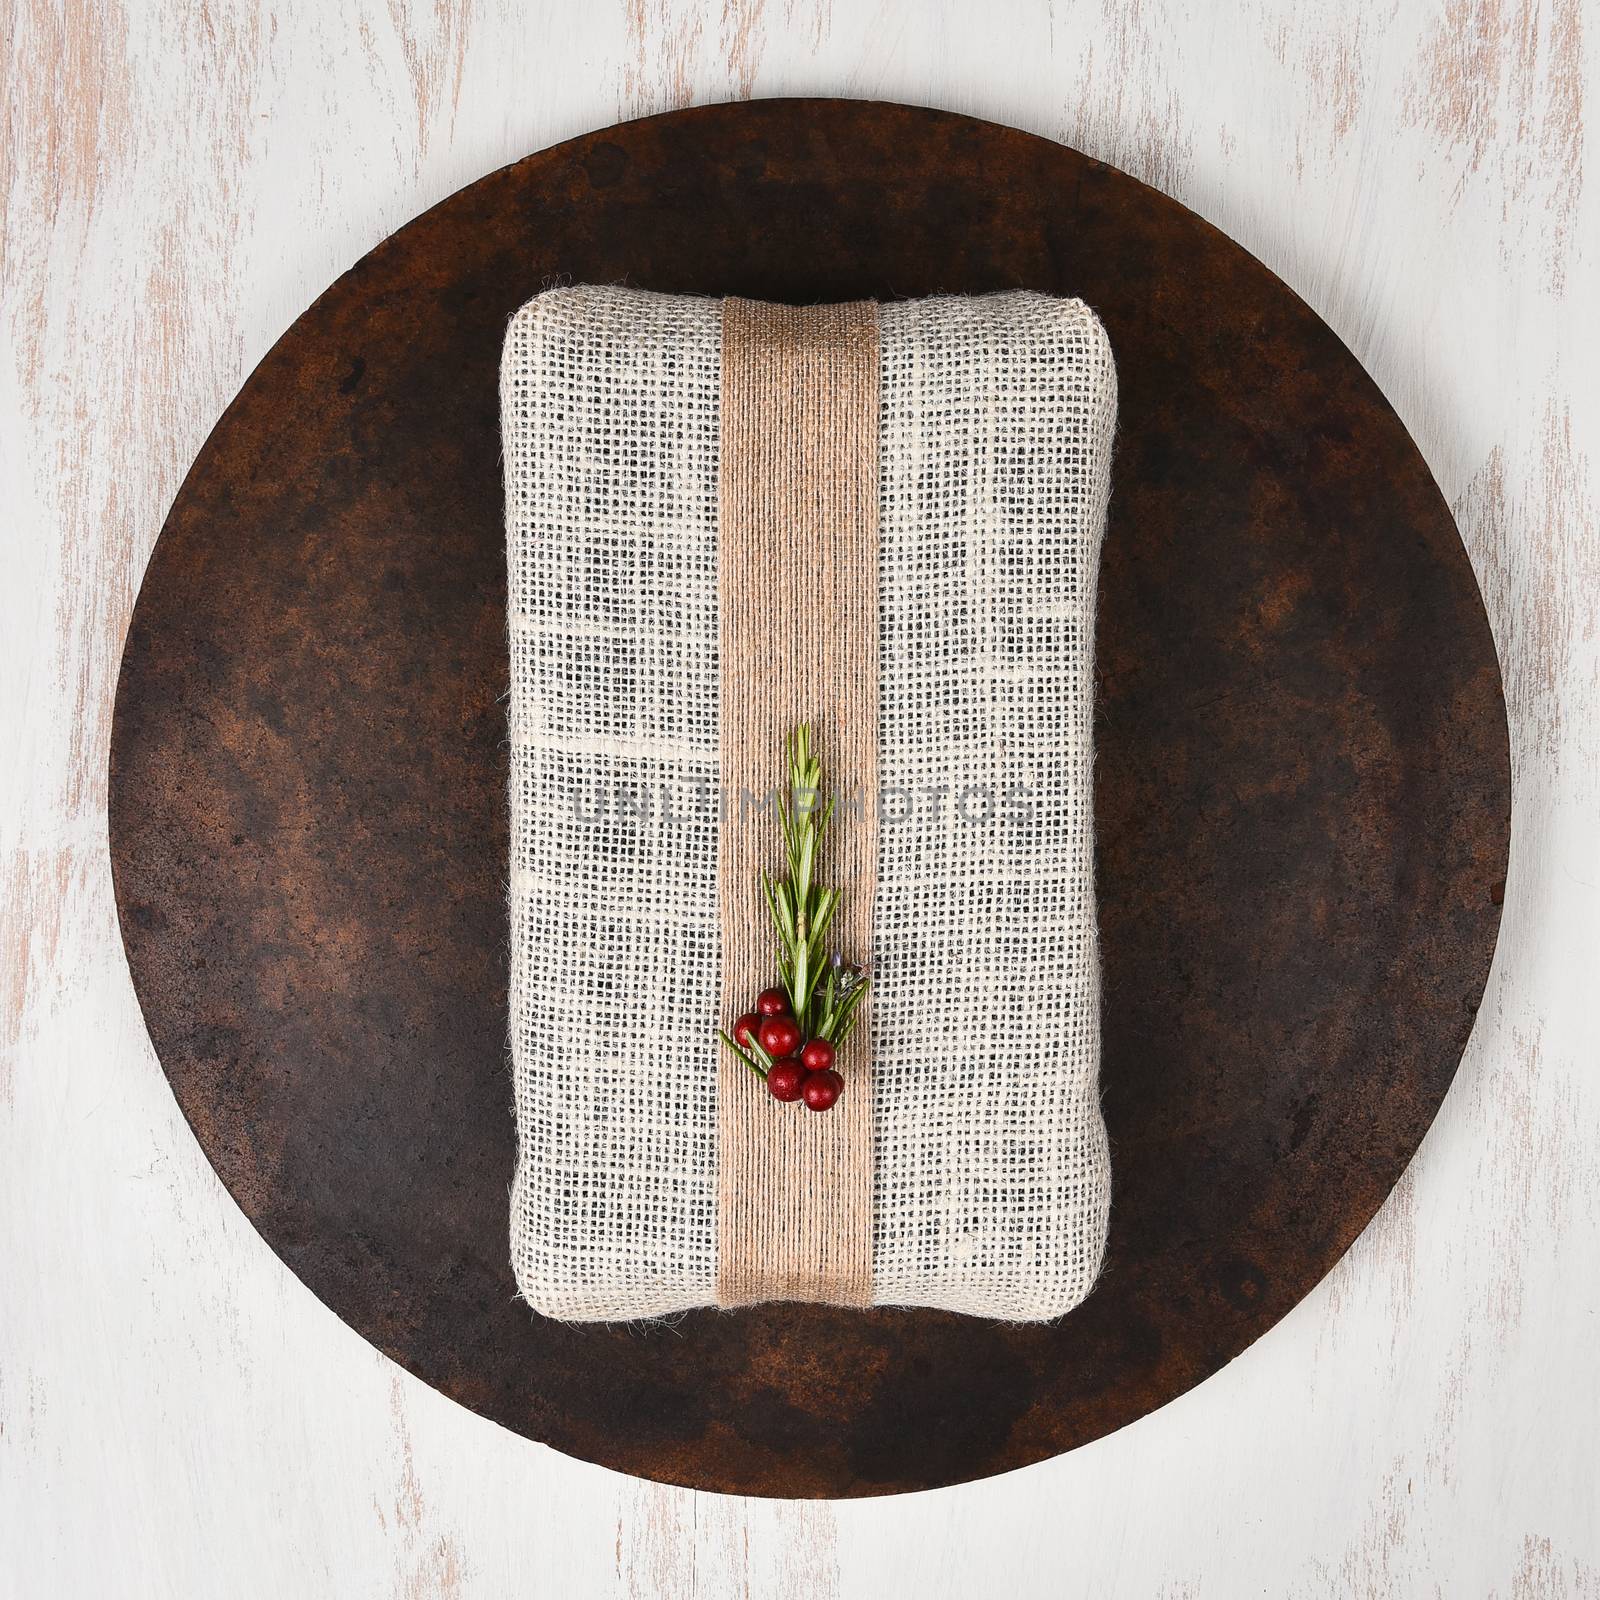 Fabric wrapped Christmas gift on a dark round stone surface on top of a rustic wood table. Square format from a high angle.